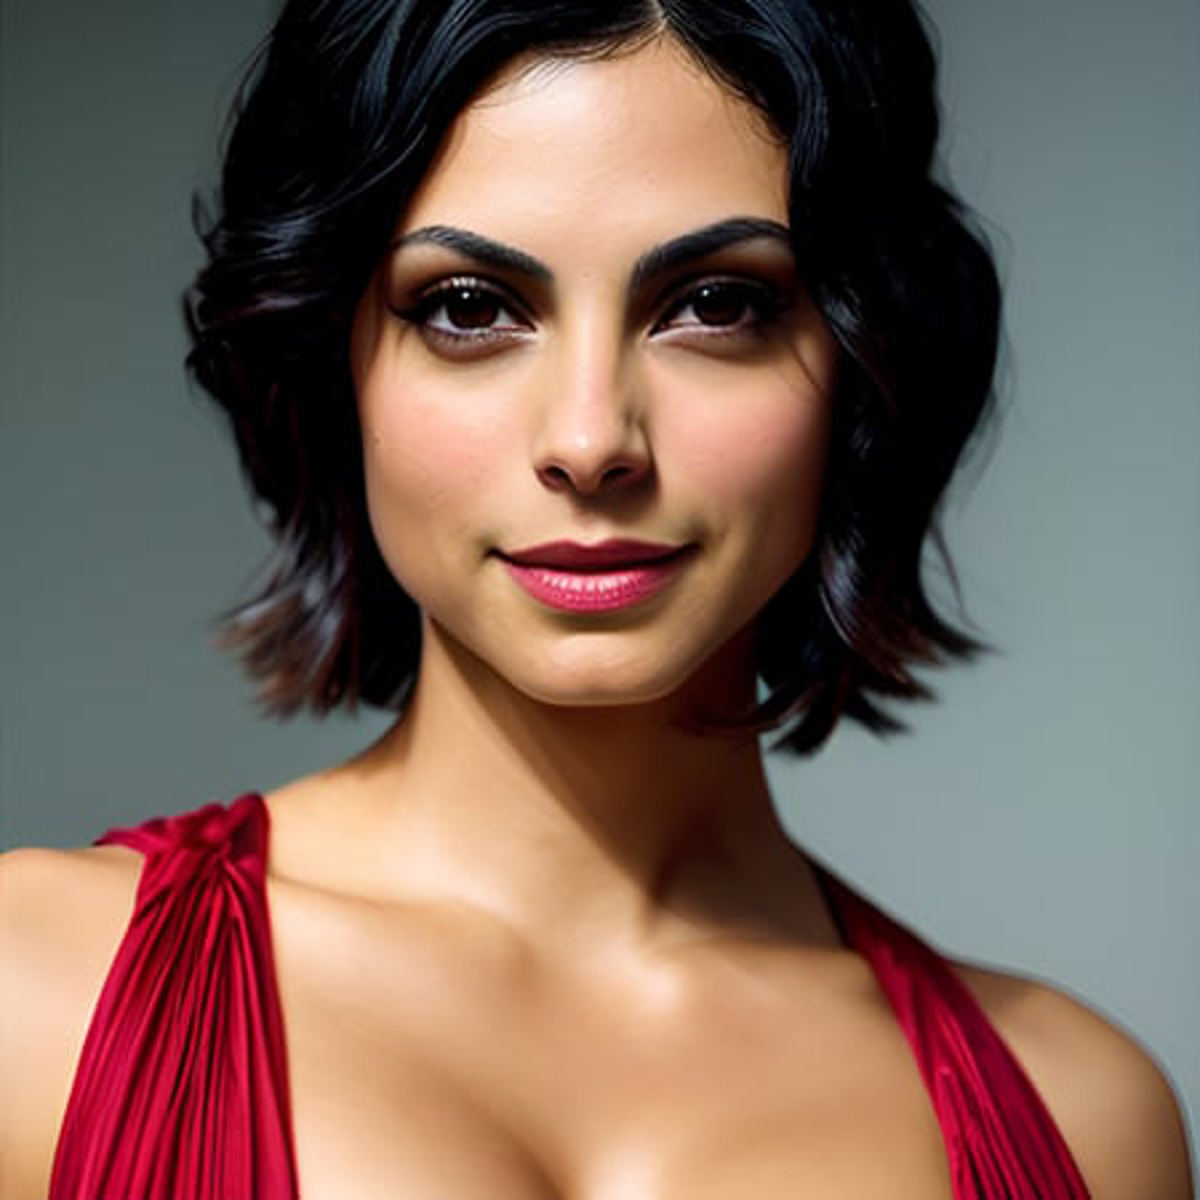 Morena Baccarin image by fredpenner